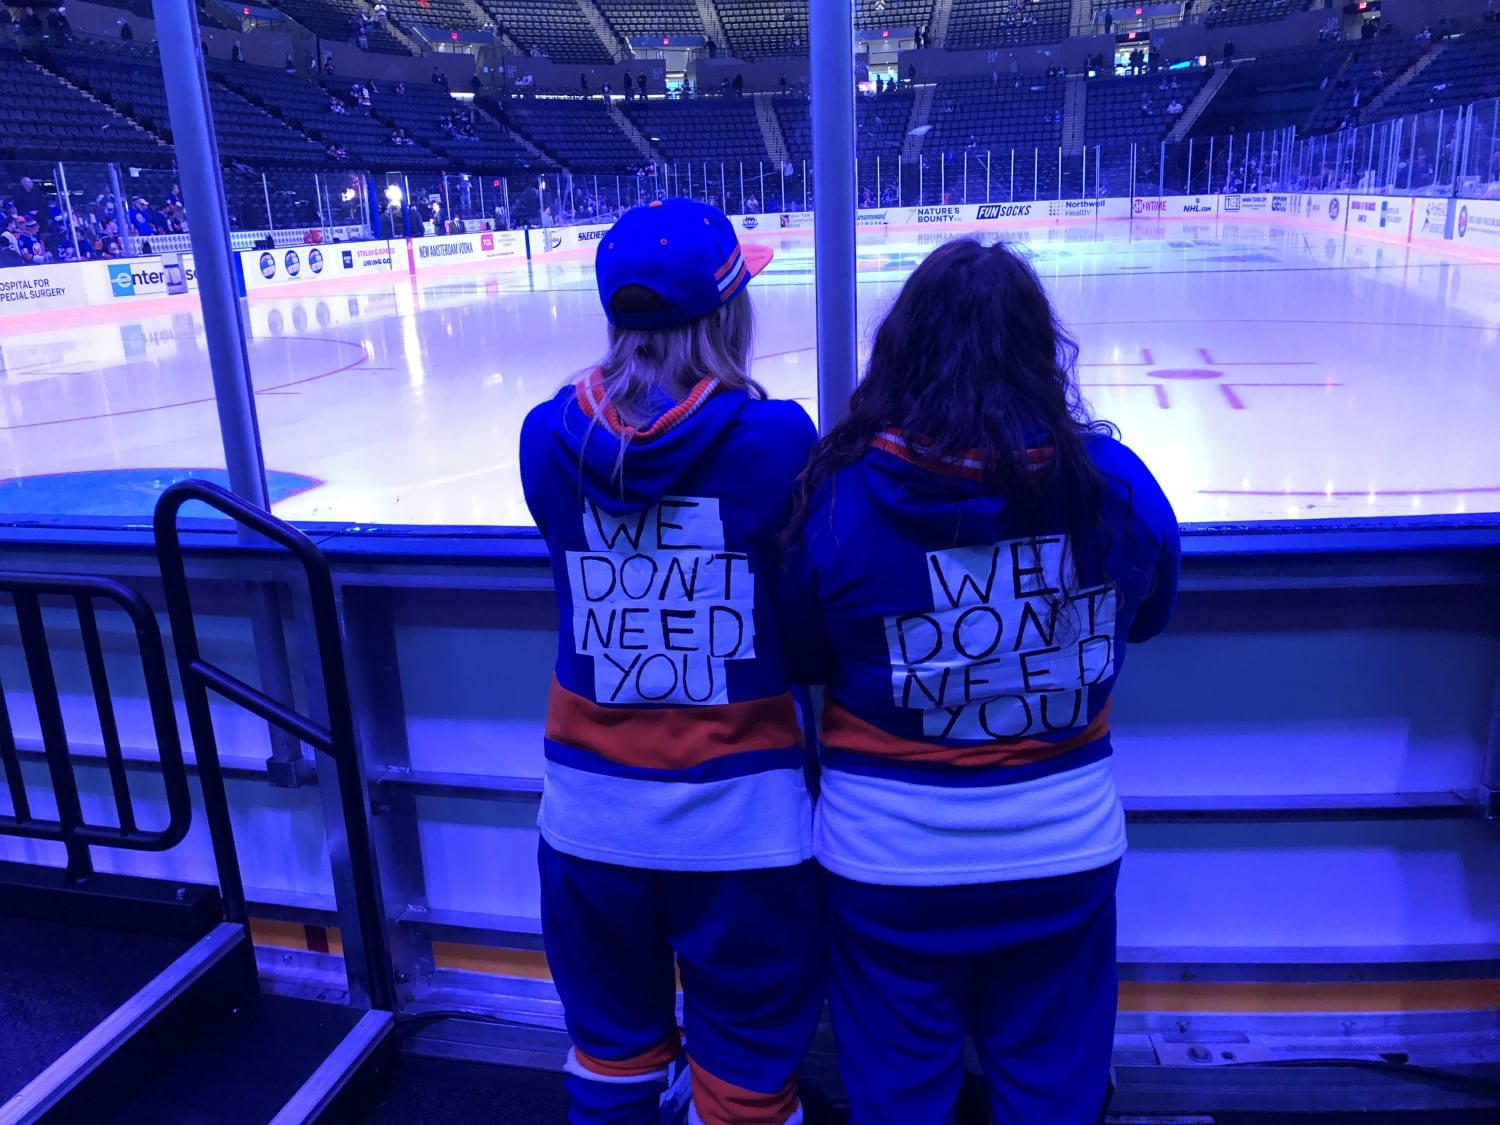 A 'mini invasion' of Whalers fans showed up for Islanders – Hurricanes game